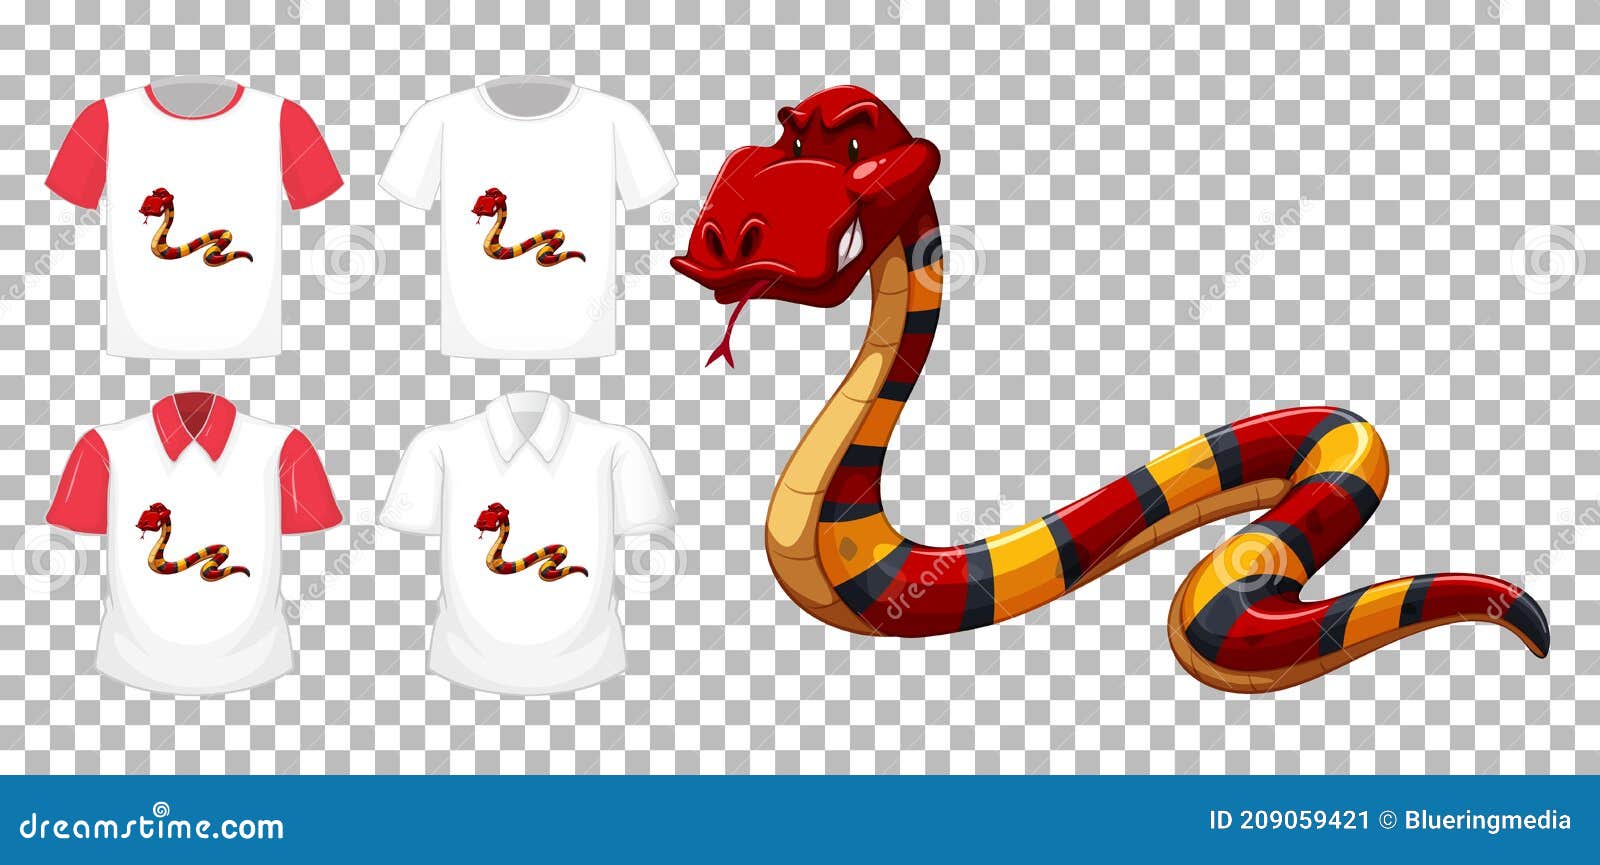 Red Snake Cartoon Character with Many Types of Shirts on Transparent  Background Stock Vector - Illustration of collection, colour: 209059421